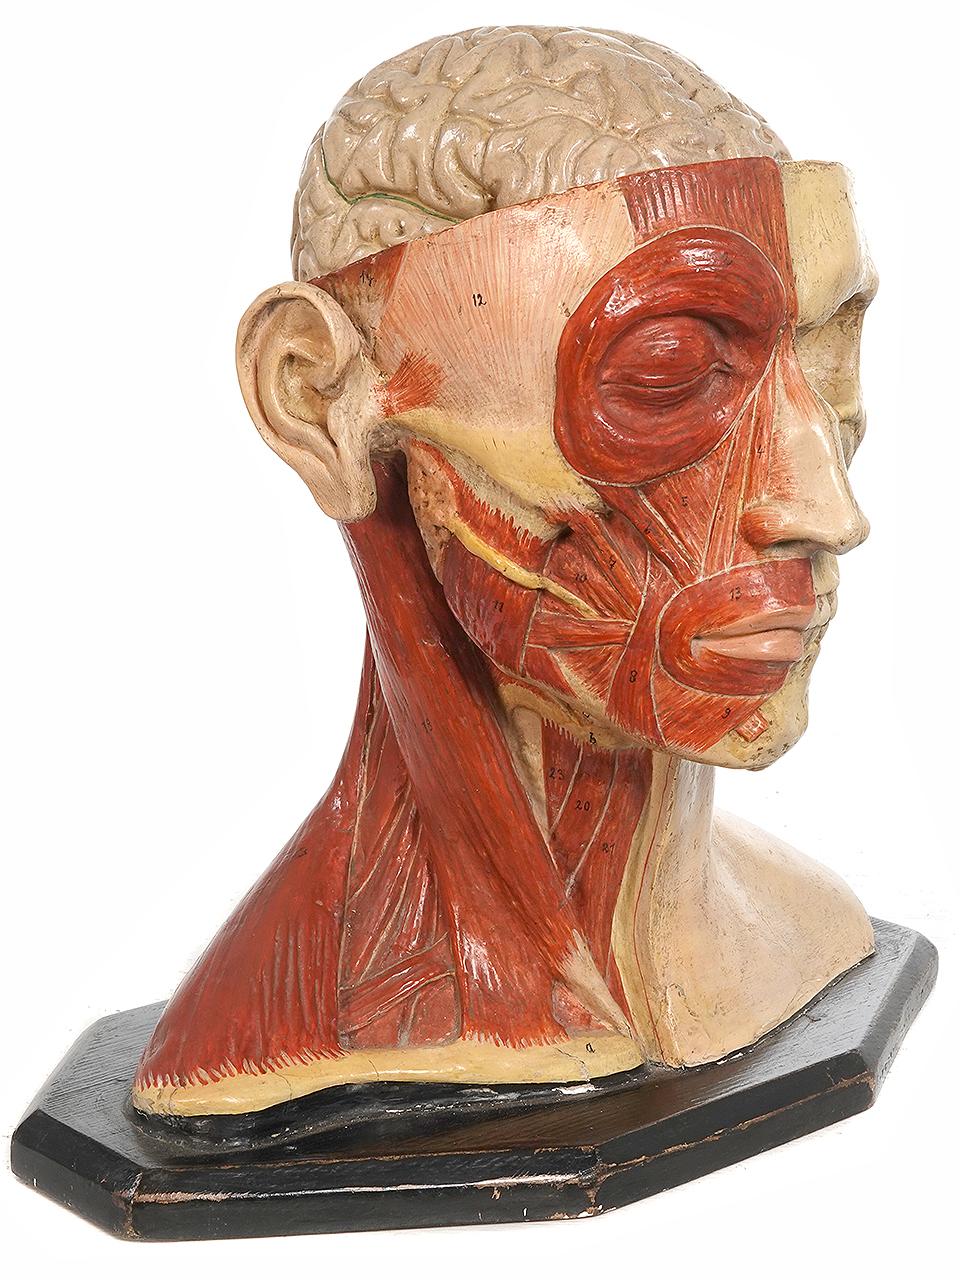 German 1890s Hand Painted Life Size Anatomical of Head